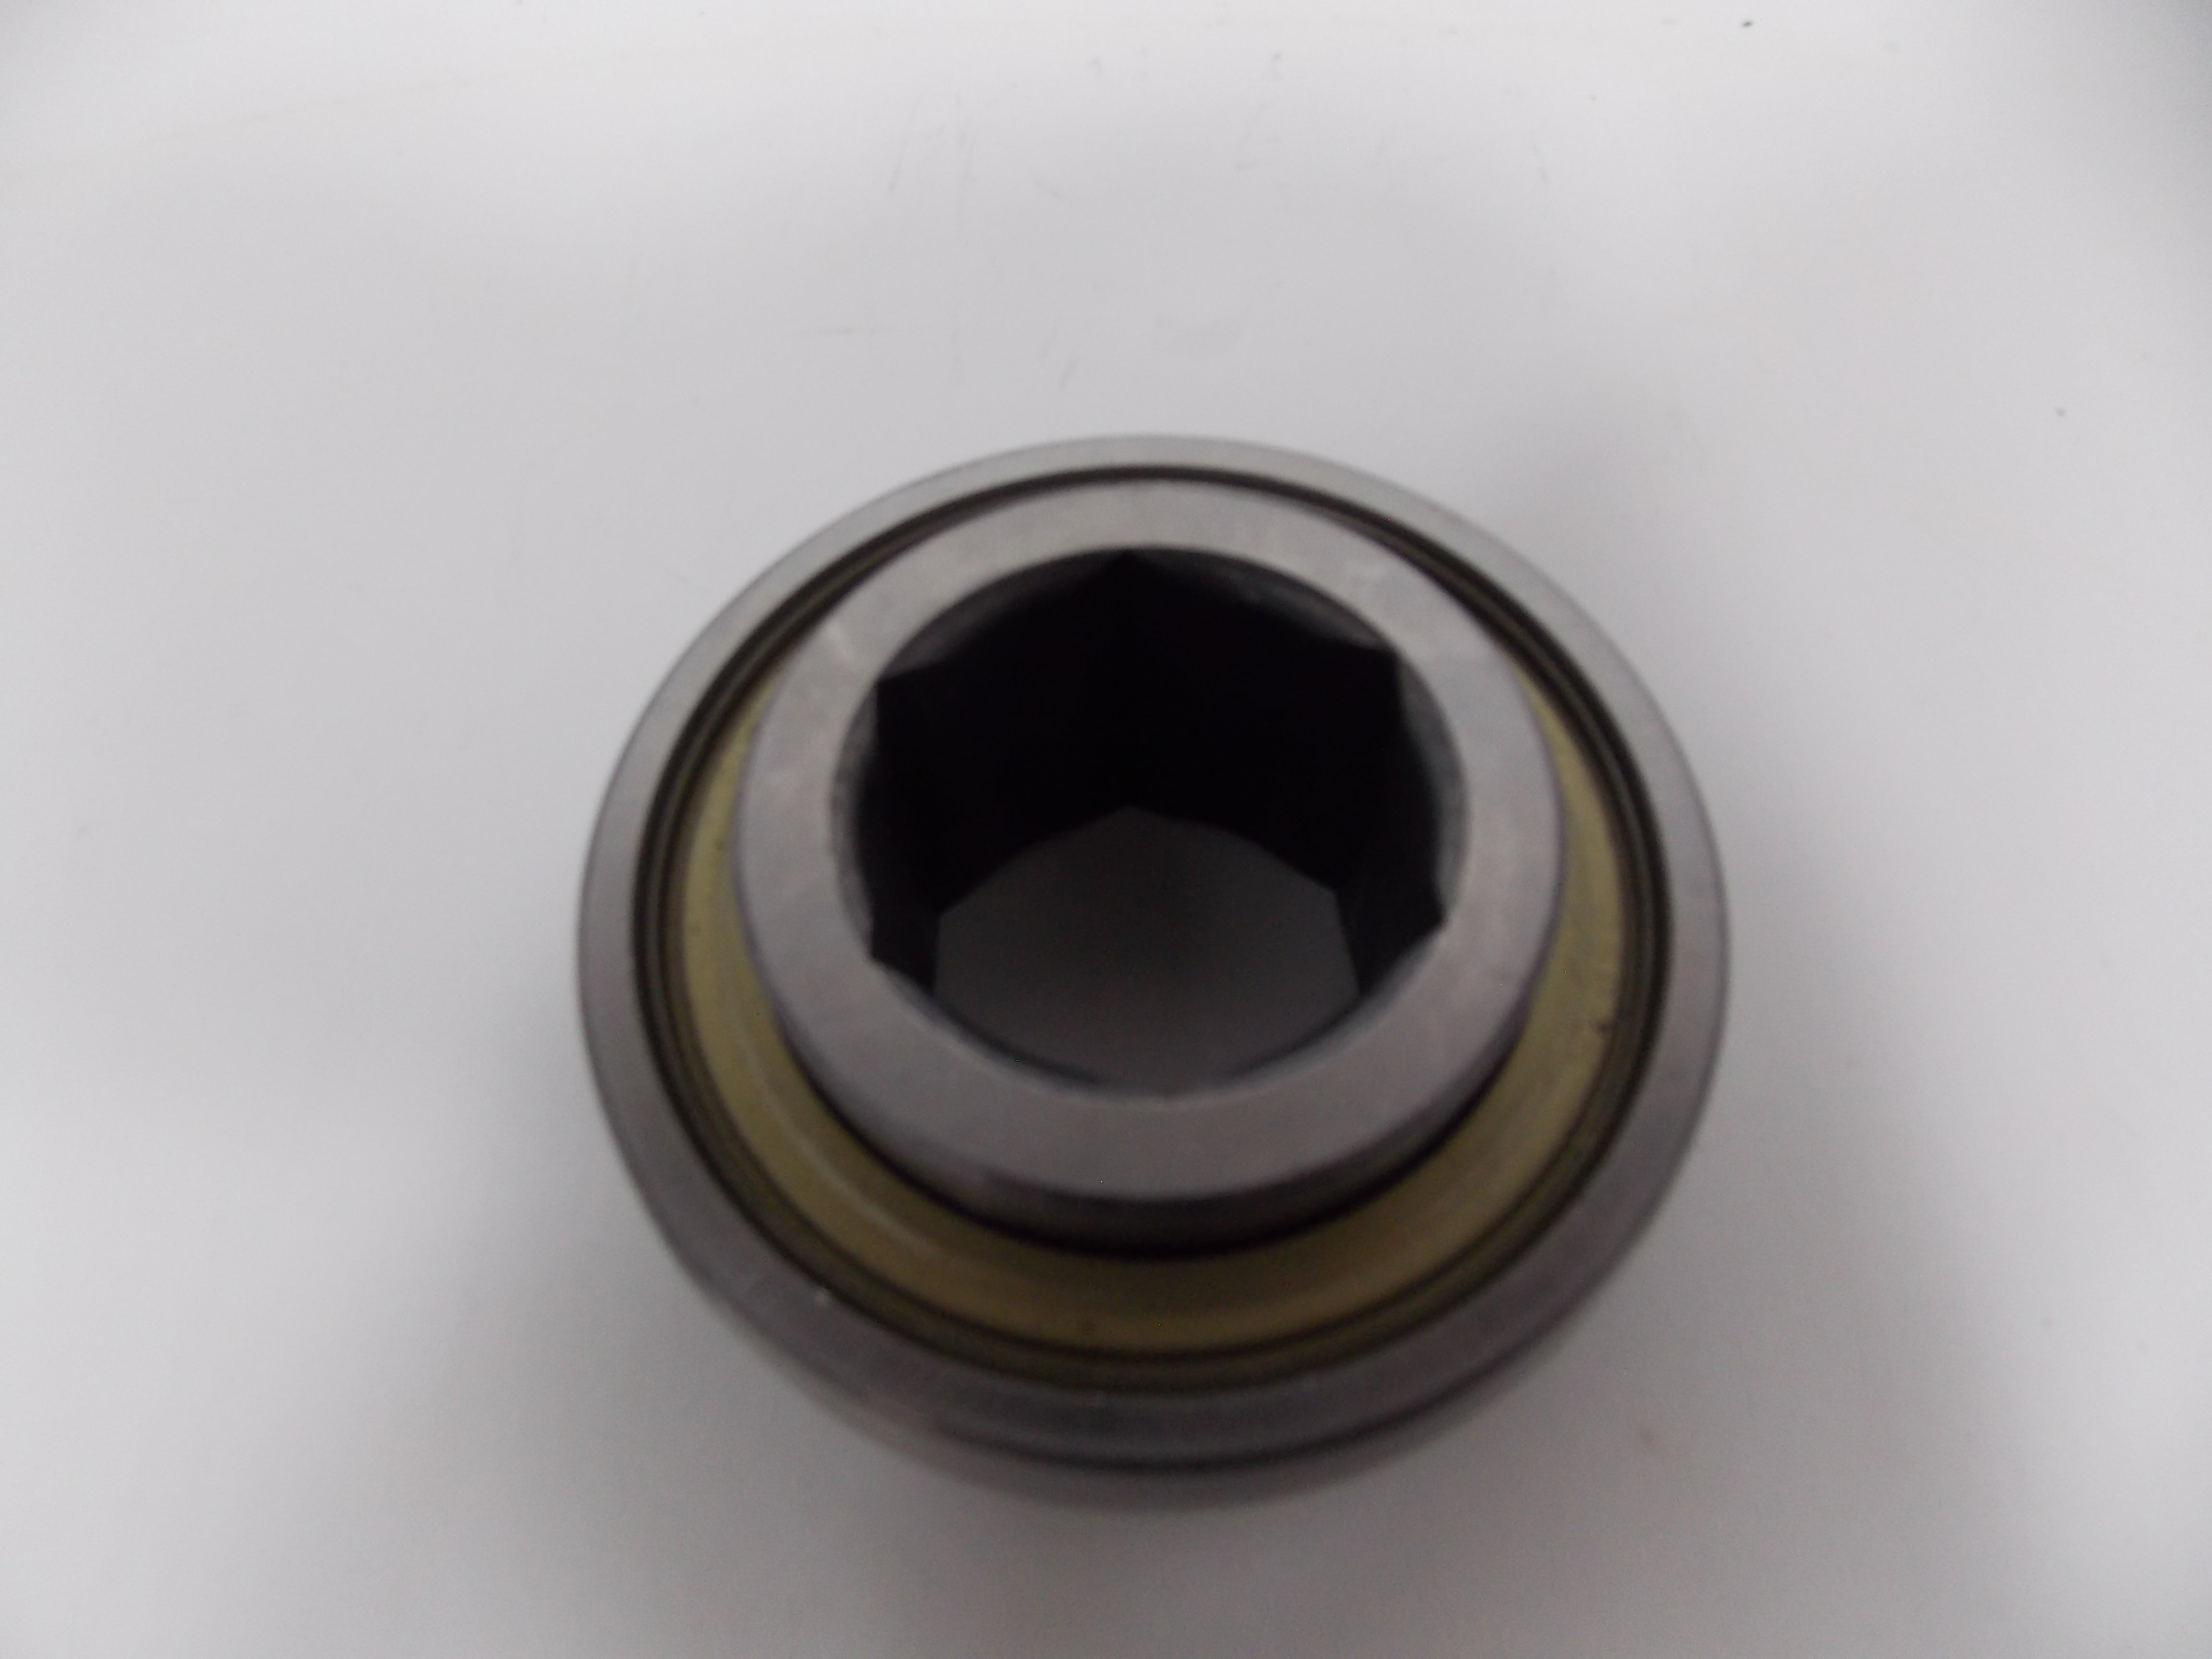 207KRRB17 Special AG Bearing 1-1/4" Hex Bore